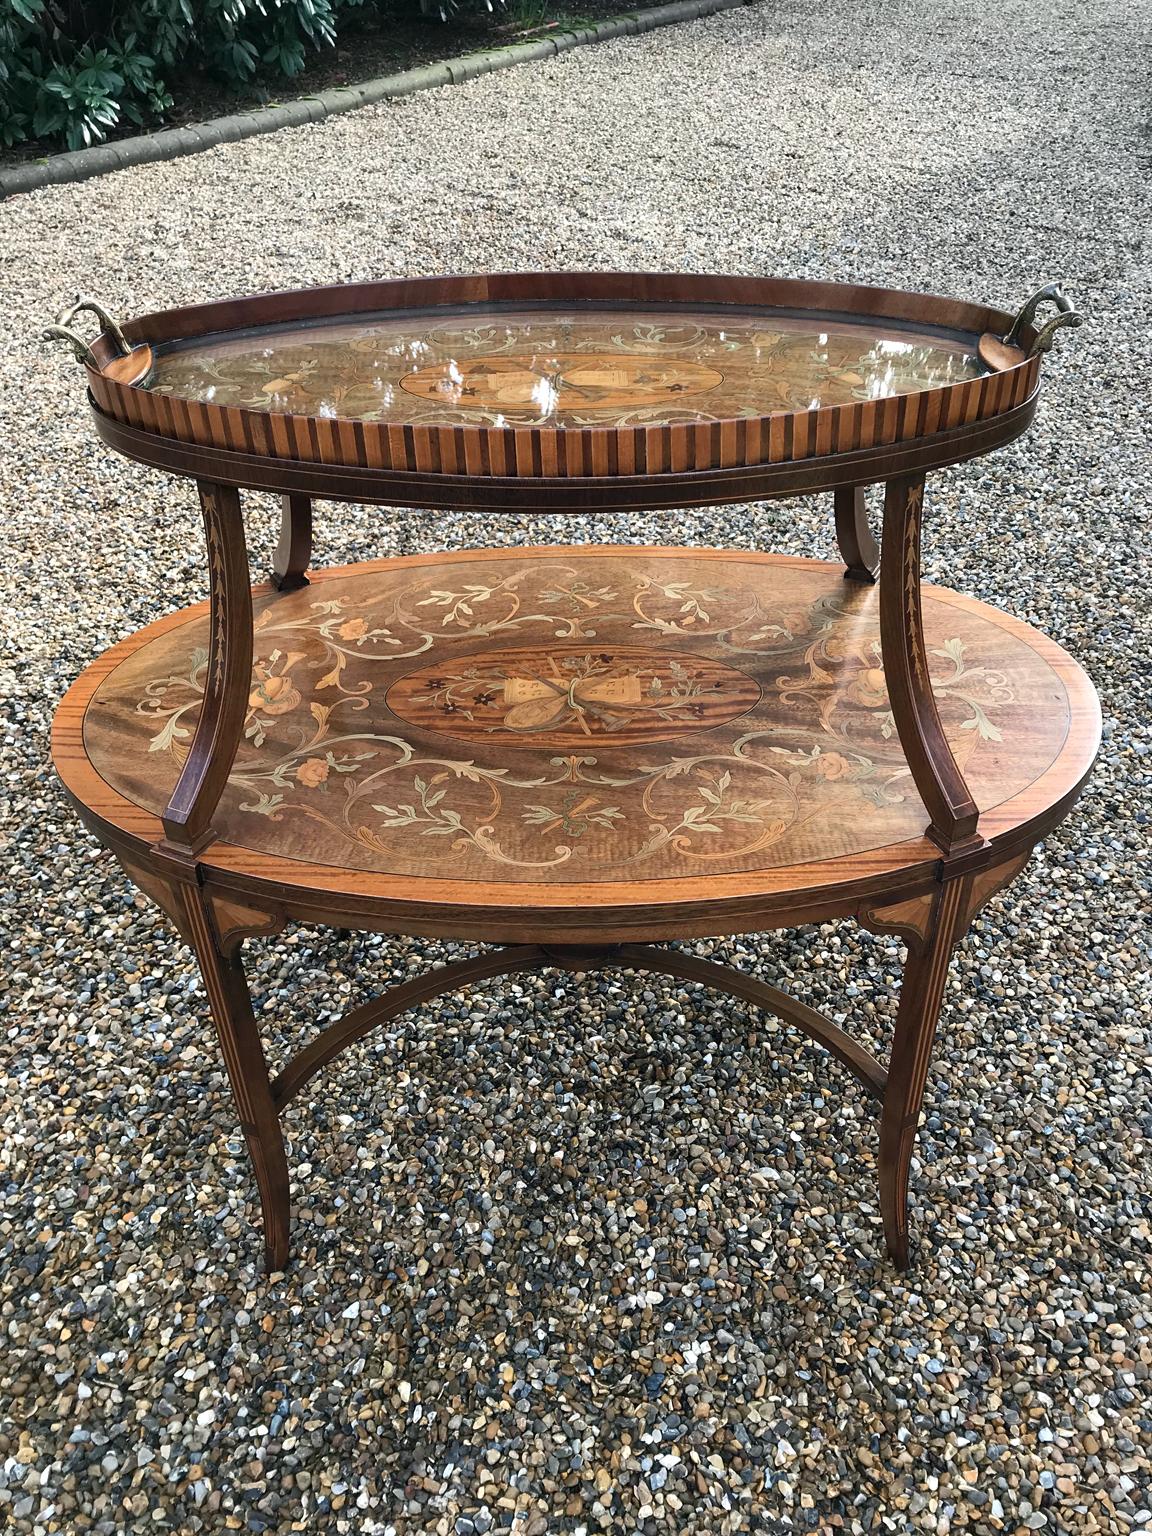 A very high quality English 19th Century Mahogany and Satinwood Marquetry Oval Two Tier Tray Table by London cabinet makers, S & H Jewell, London.

This table consists of two oval tiers, both with a central oval mahogany panel inlaid with musical